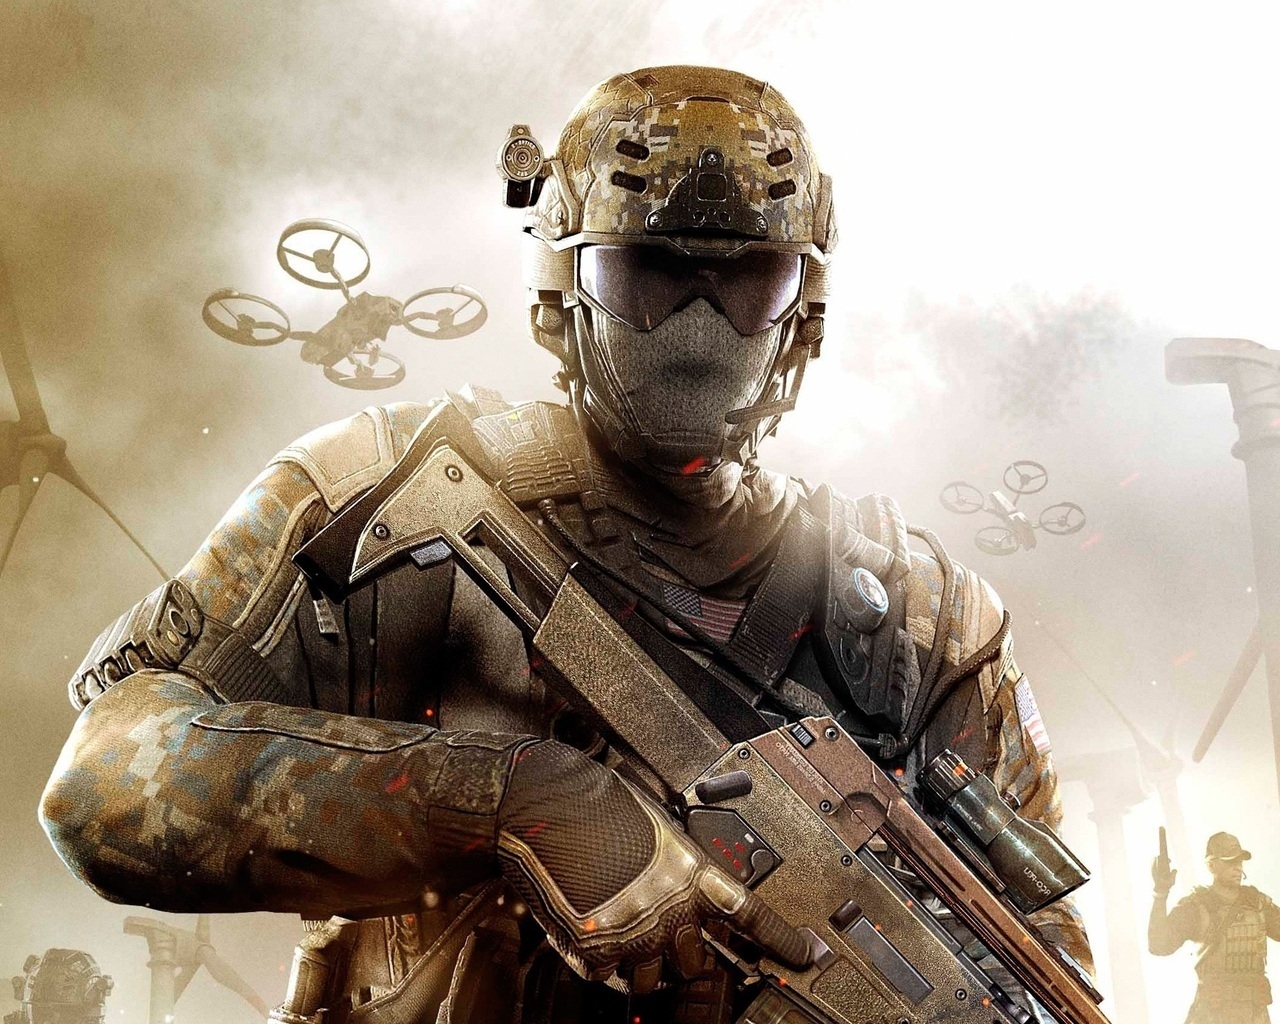 Call of Duty Black Ops 2 Soldier for 1280 x 1024 resolution